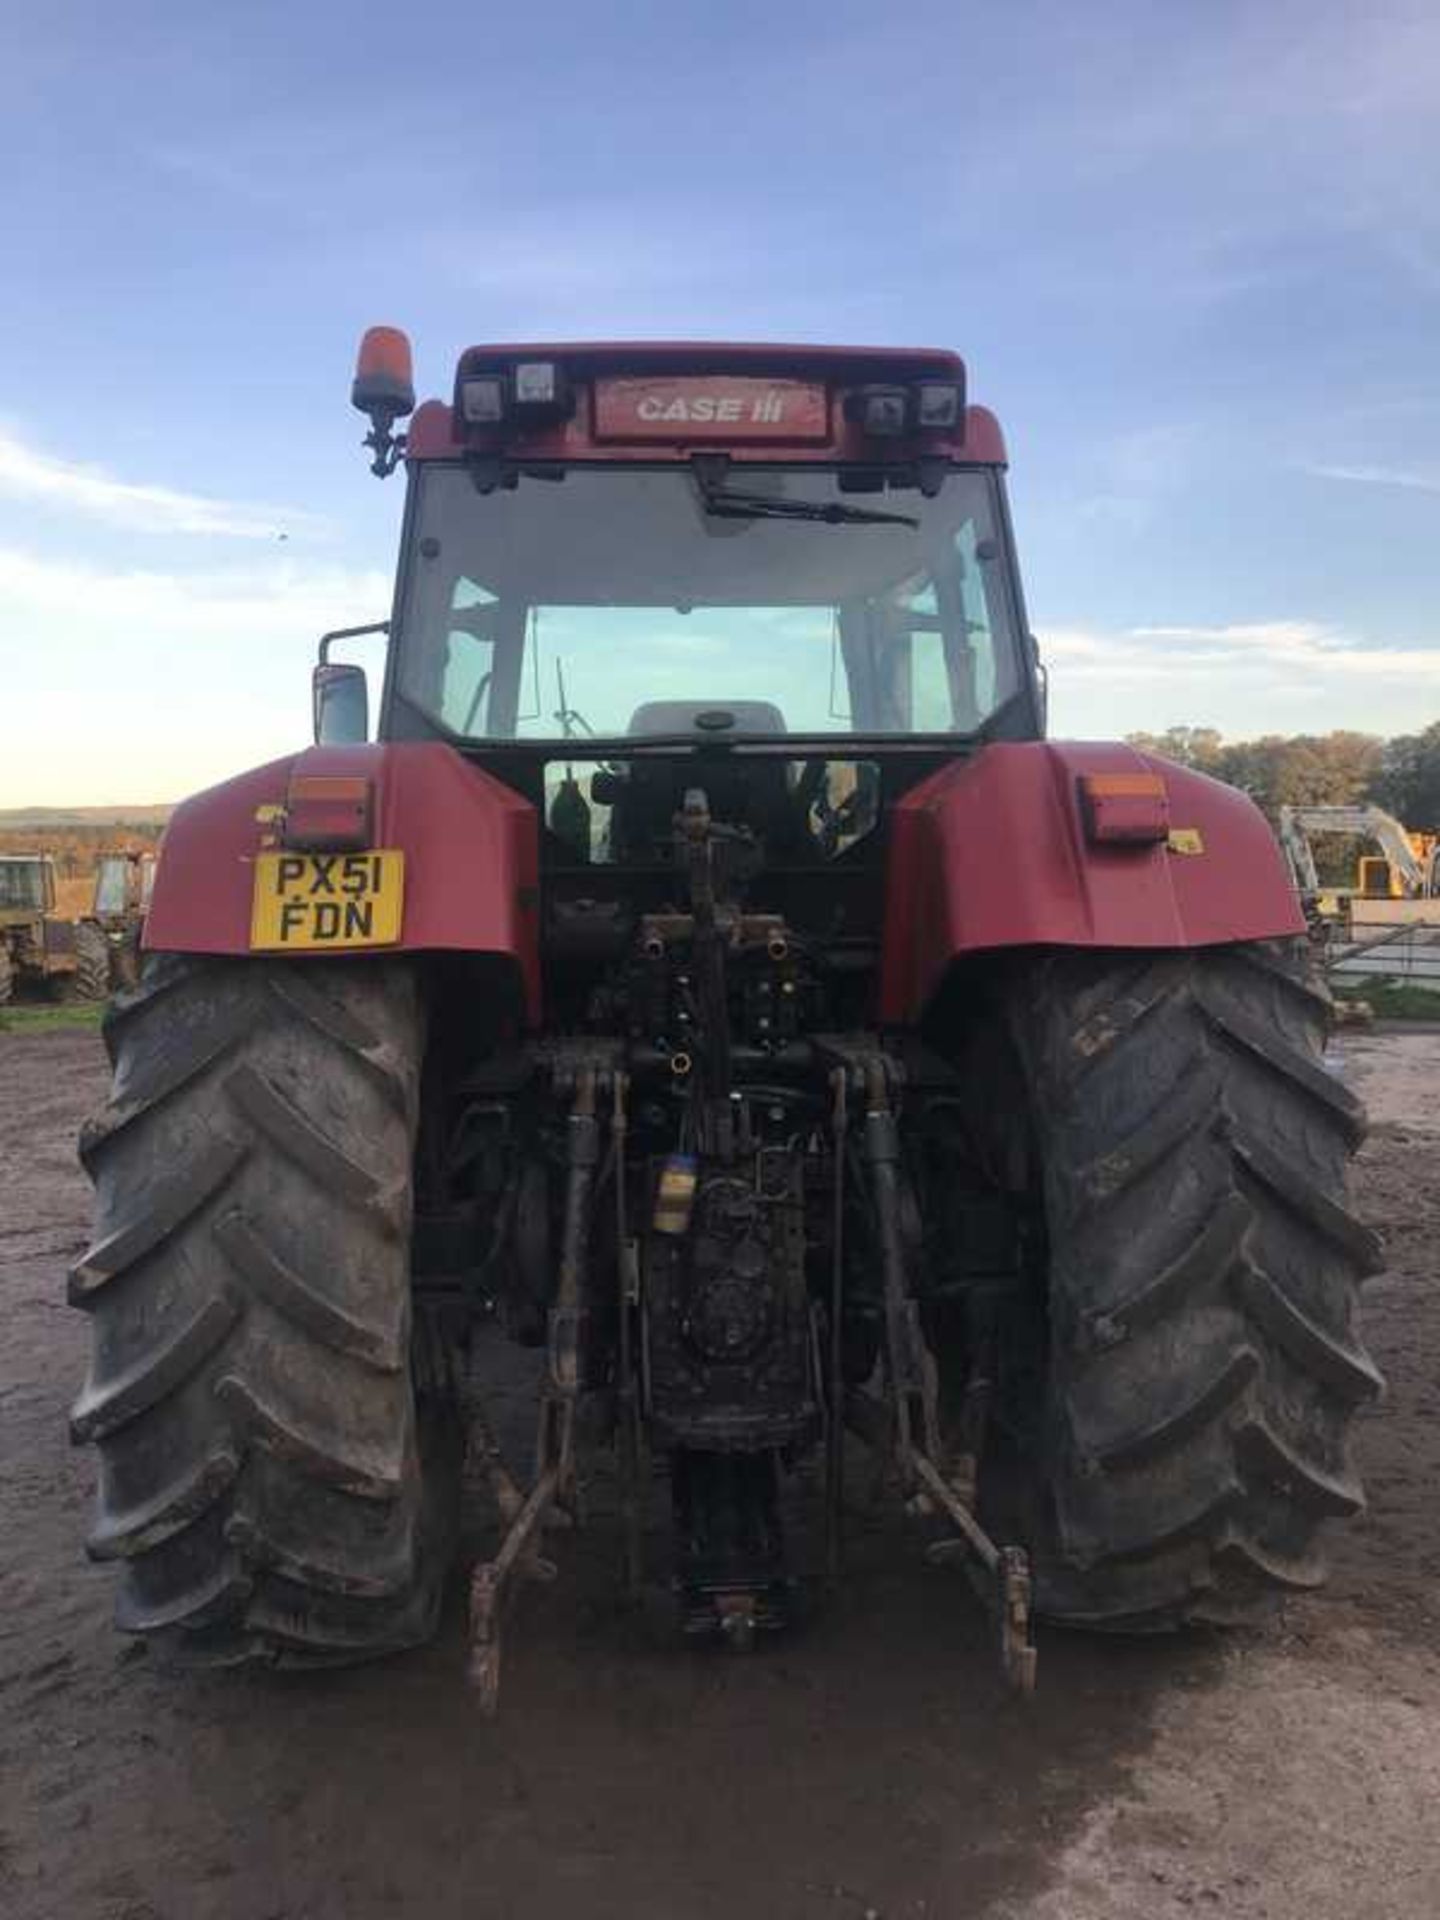 2002 CASE C150 4 wd tractor Reg No PX51 FDN 9340 hrs (not verified) - Image 7 of 15